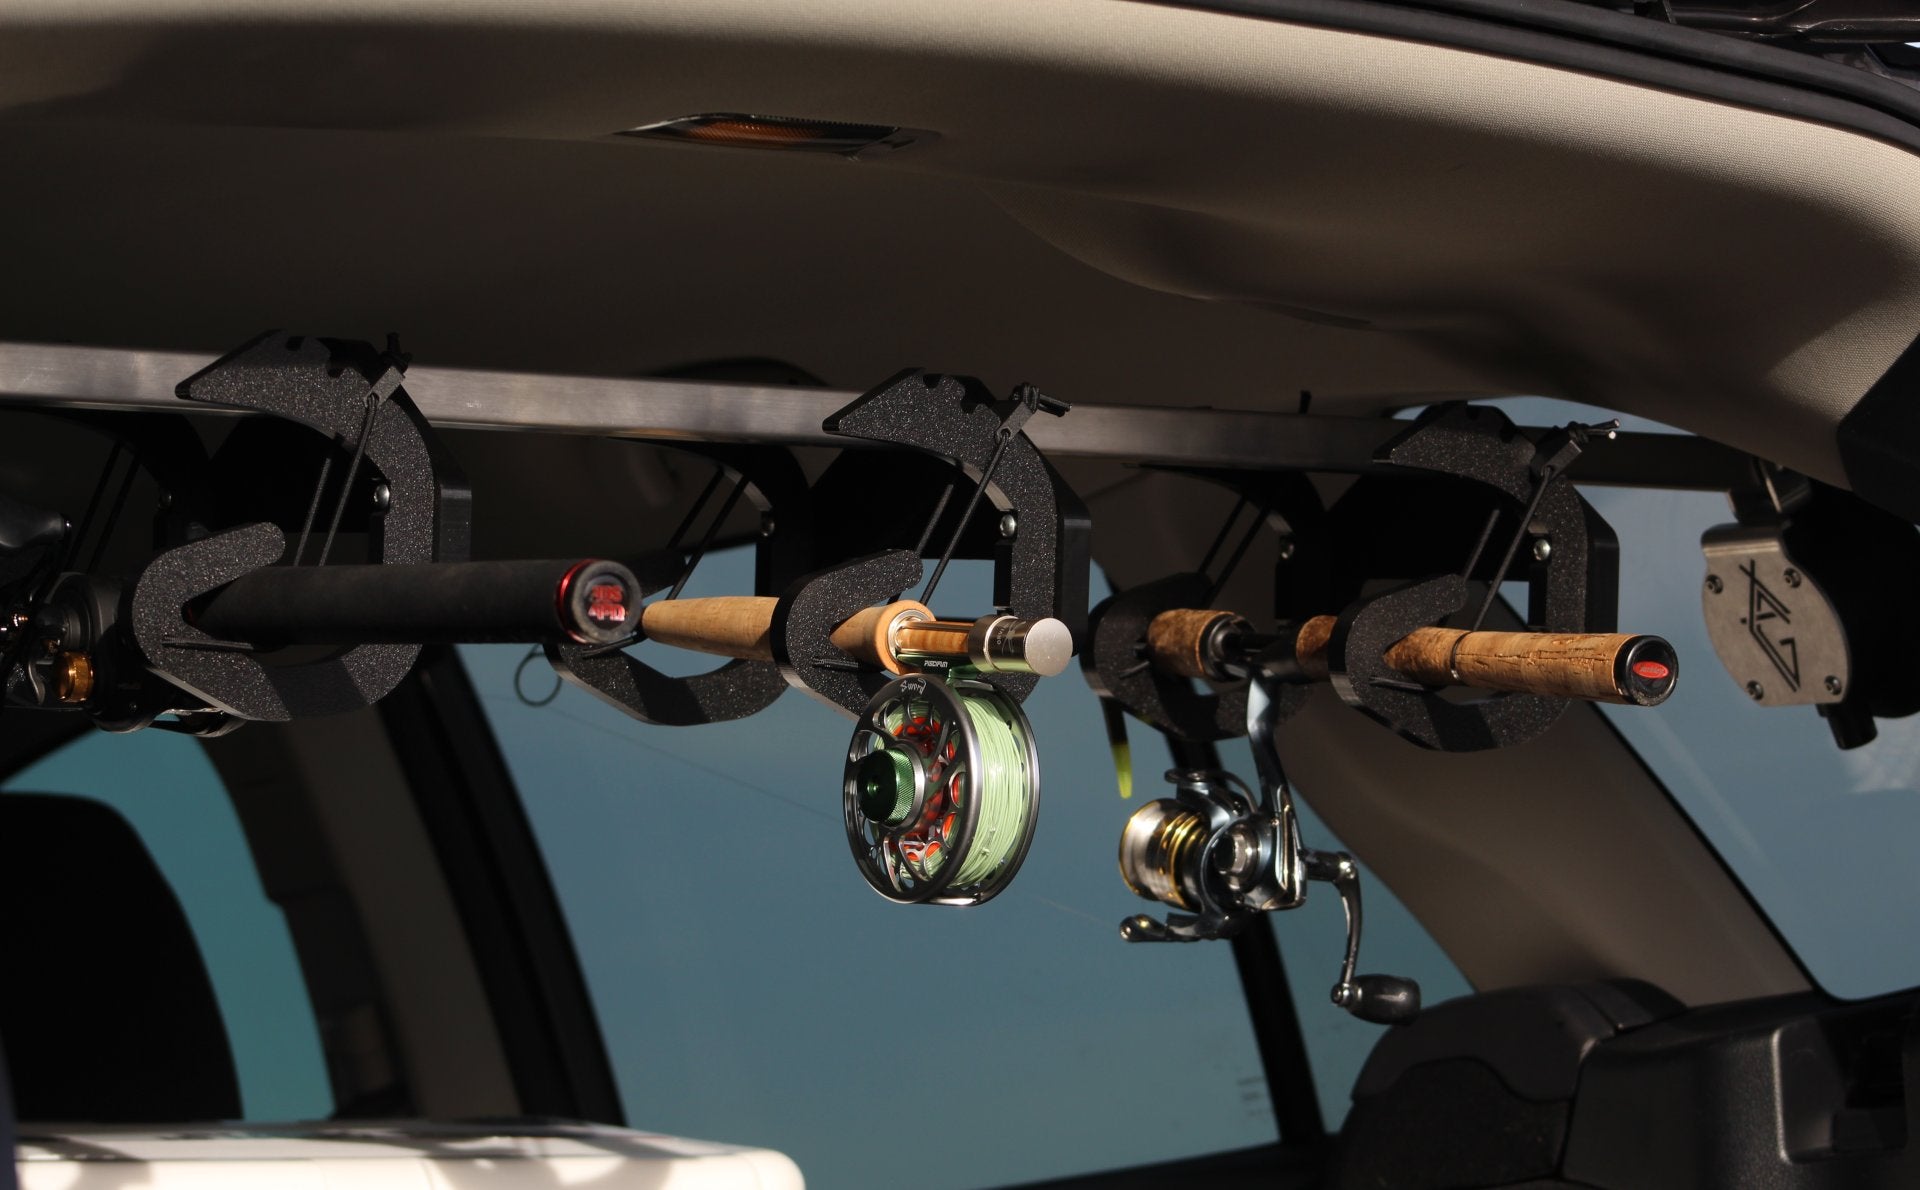 Rod Rig holding a fly rod and a spinning reel rod. In-vehicle fishing rod carrier.